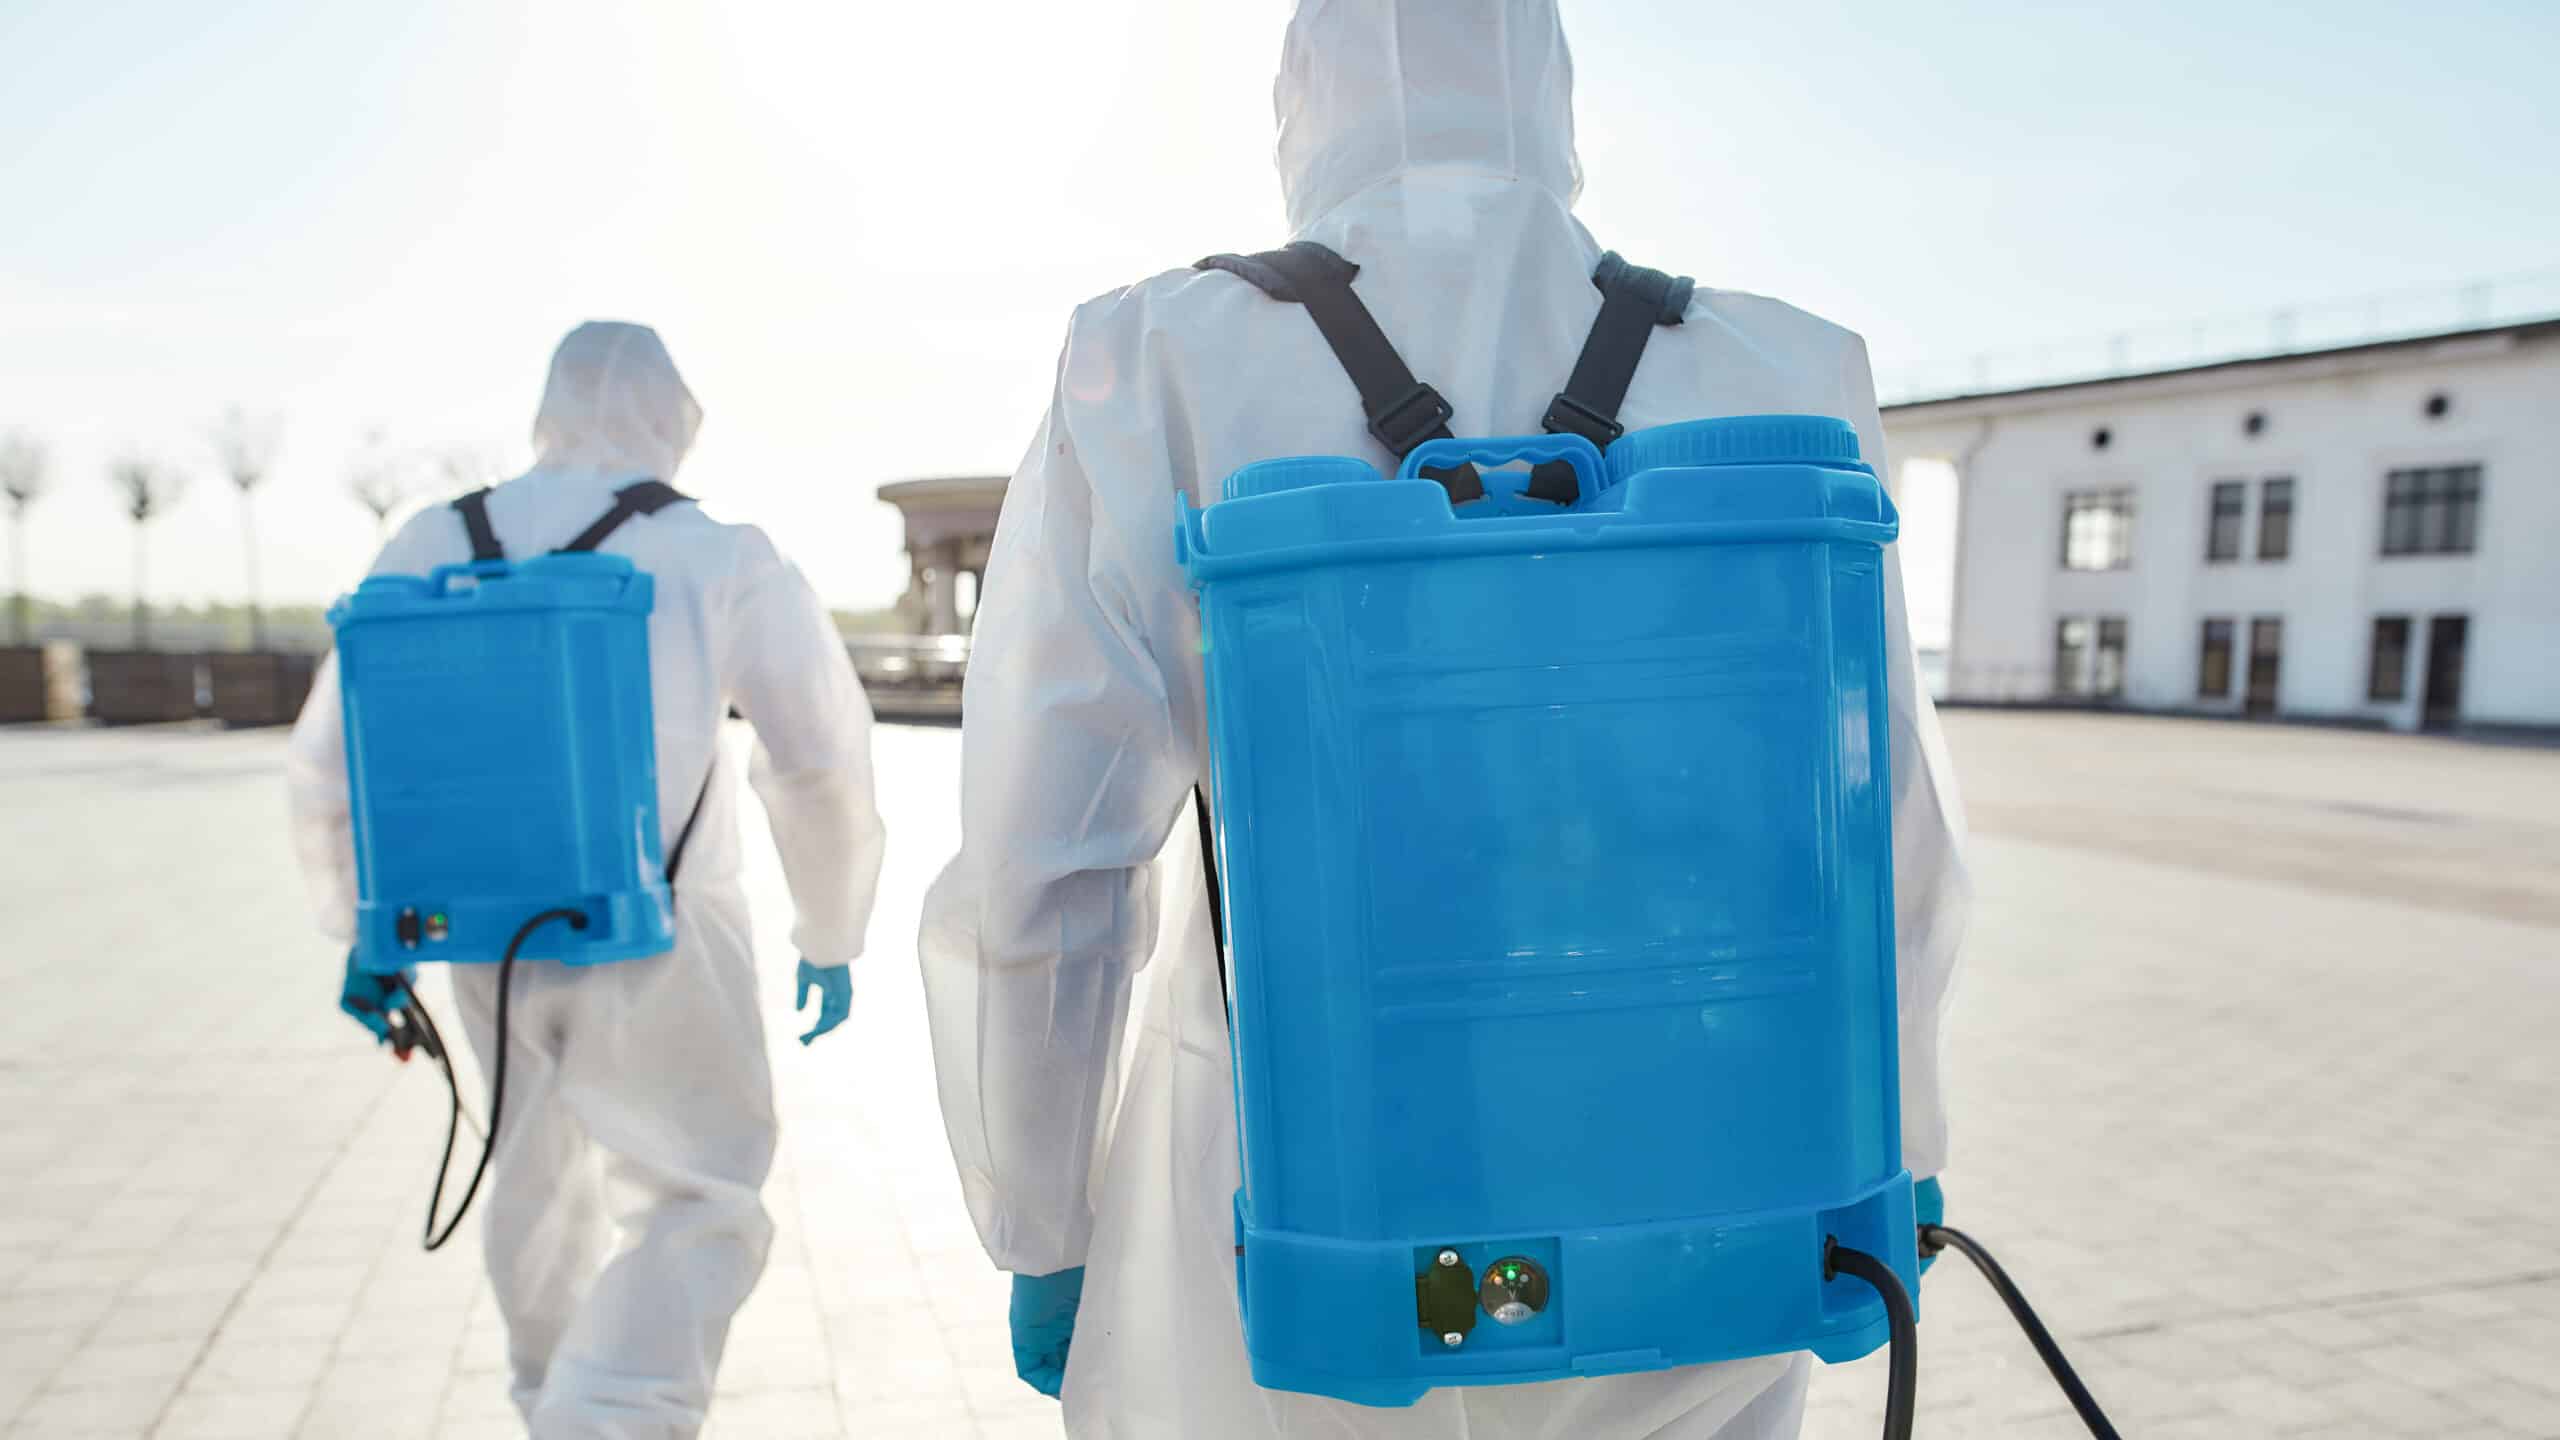 Protecting Public Health: The Vital Role of Biohazard Cleaning Professionals